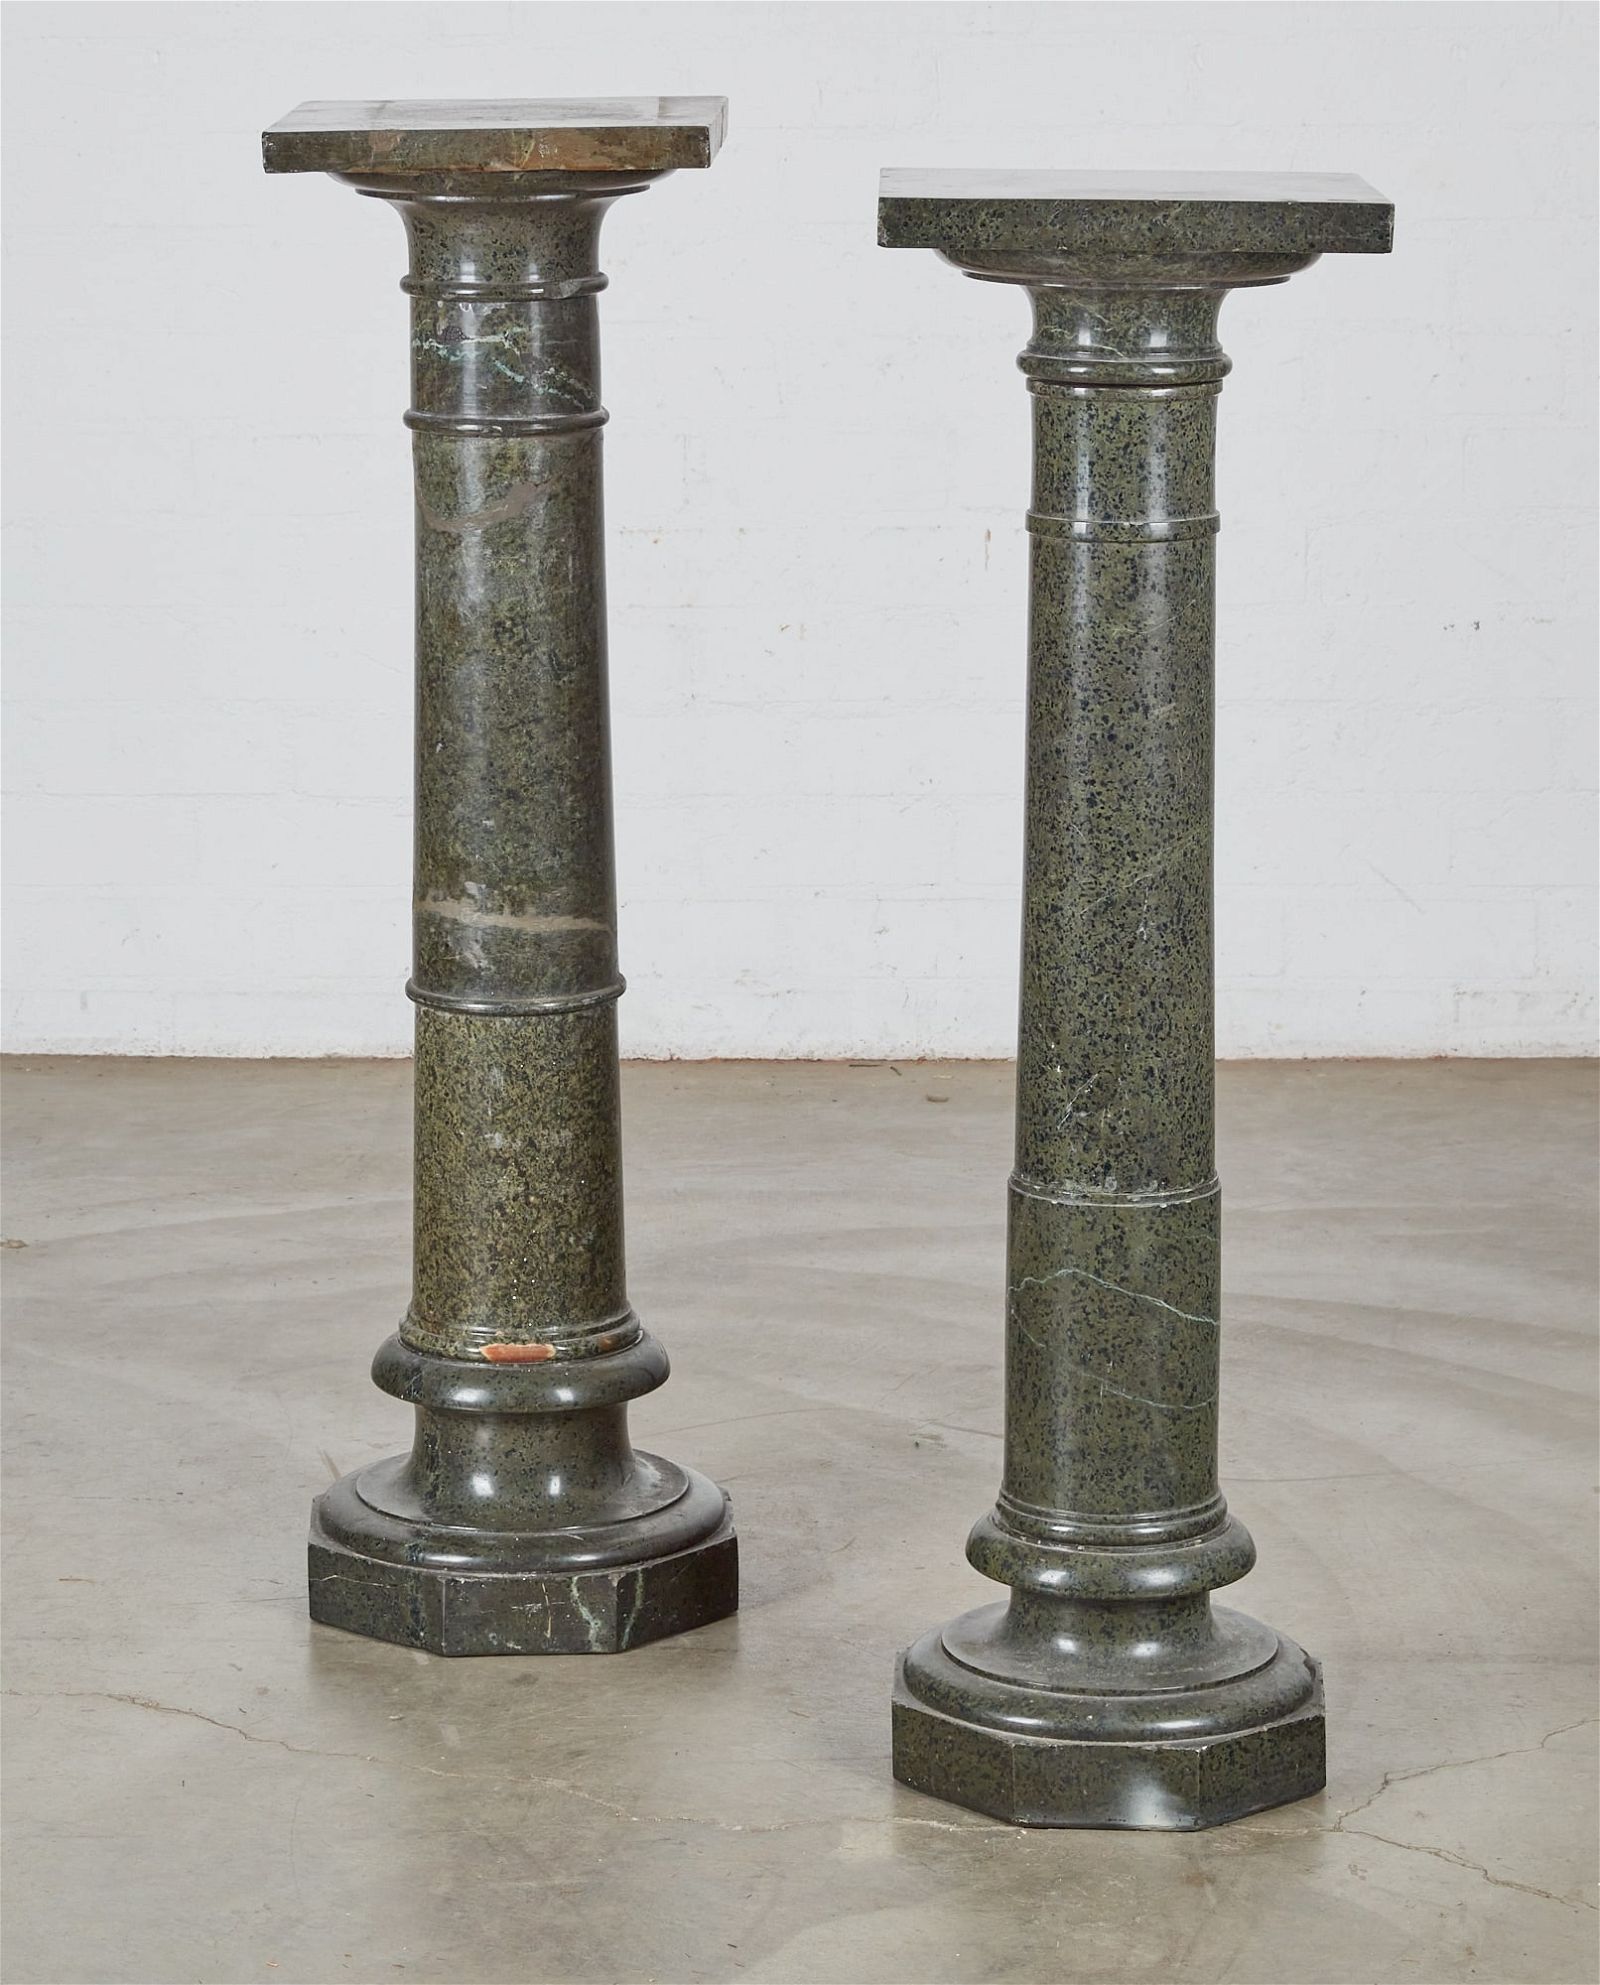 TWO SERPENTINE PEDESTALS WITH REVOLVING